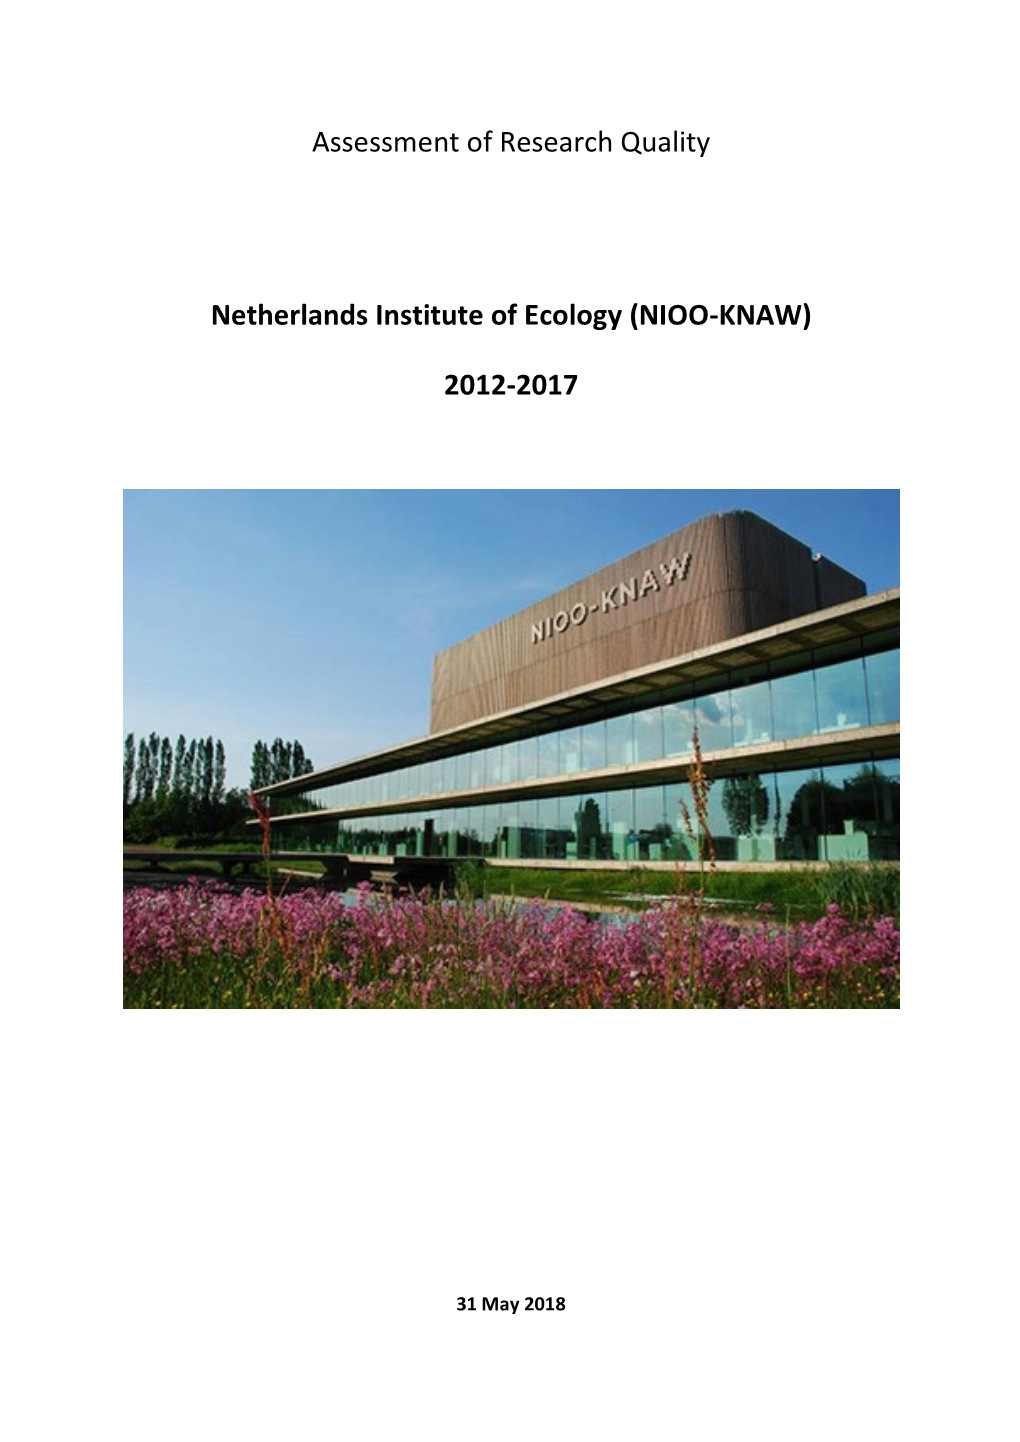 Assessment of Research Quality Netherlands Institute of Ecology (NIOO-KNAW) 2012-2017